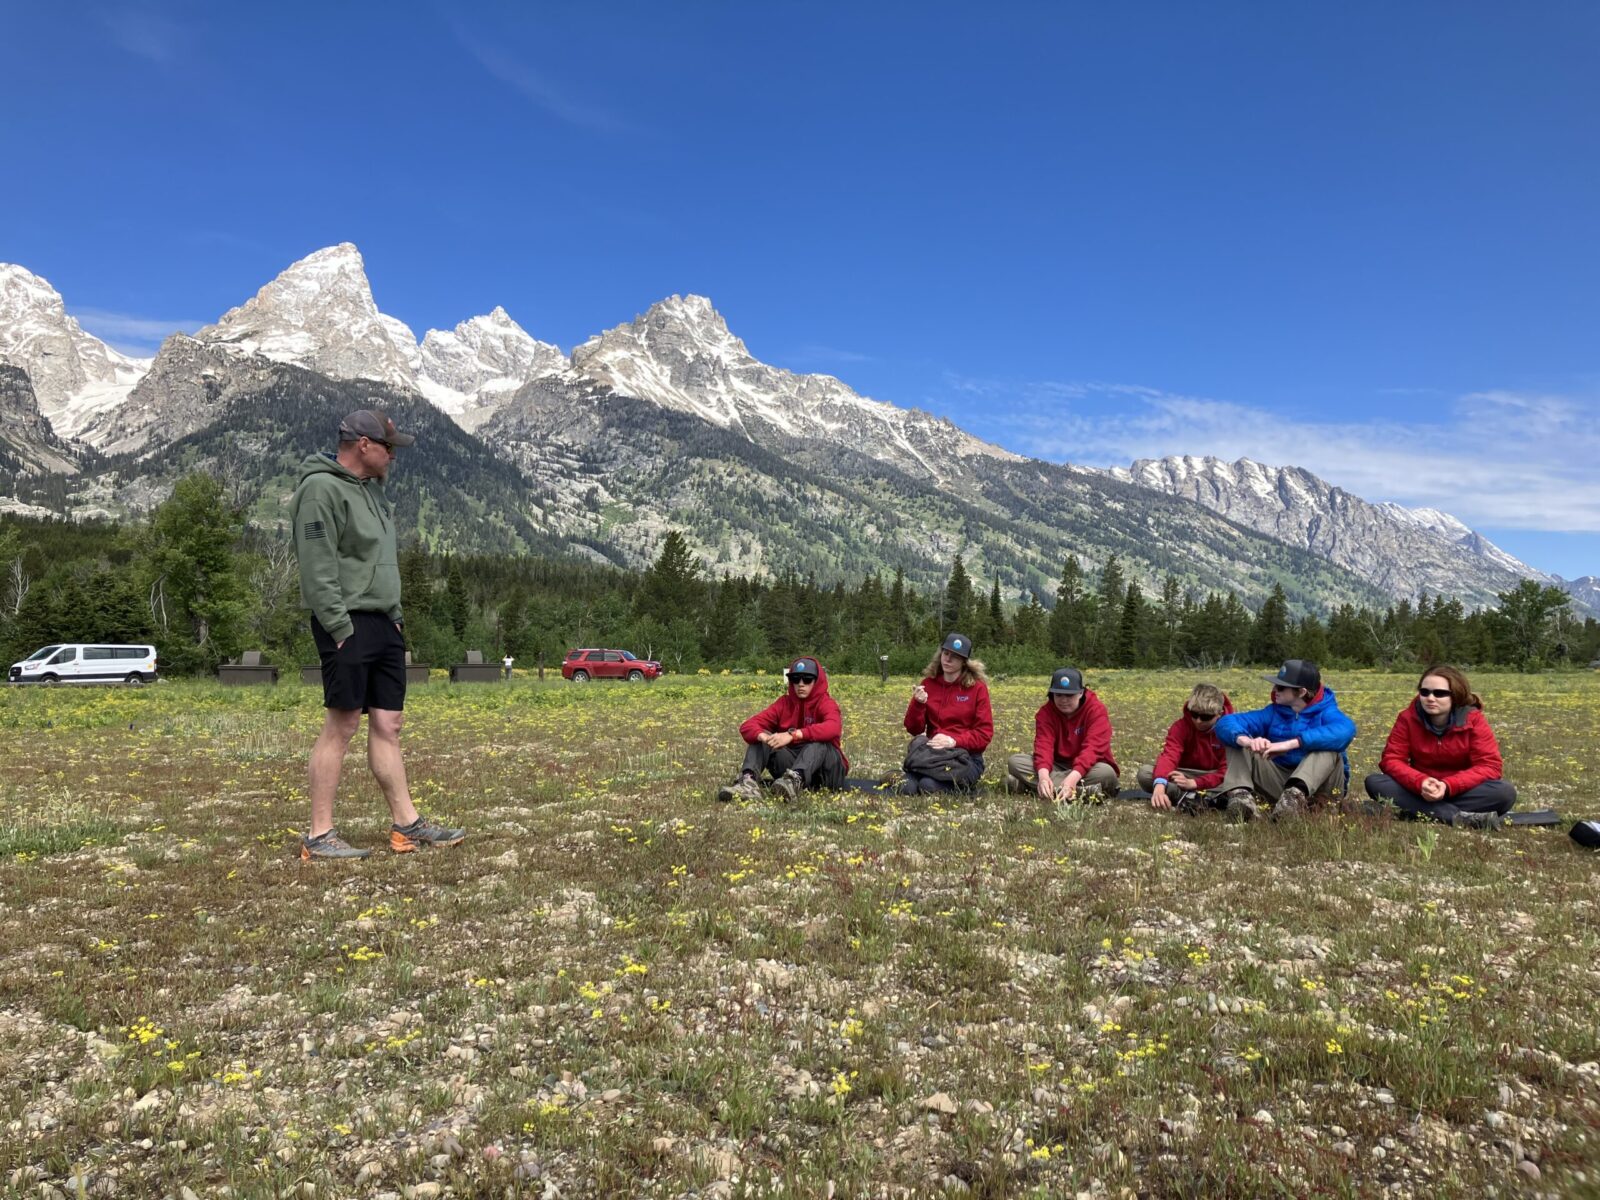 The YCP crew learns about wilderness first aid below the Tetons.